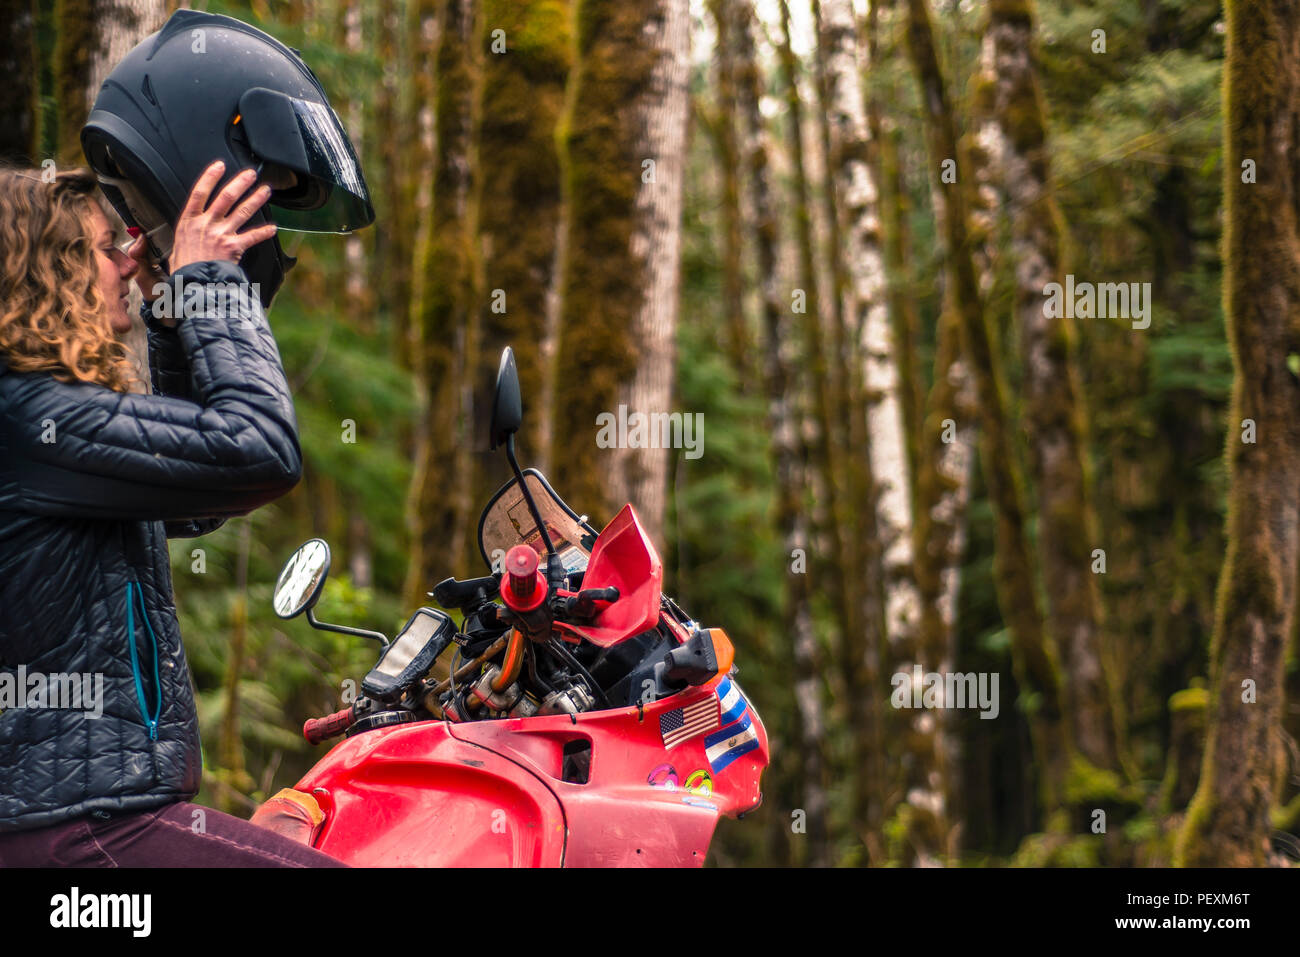 Woman on motorcycle taking off crash helmet in forest Stock Photo